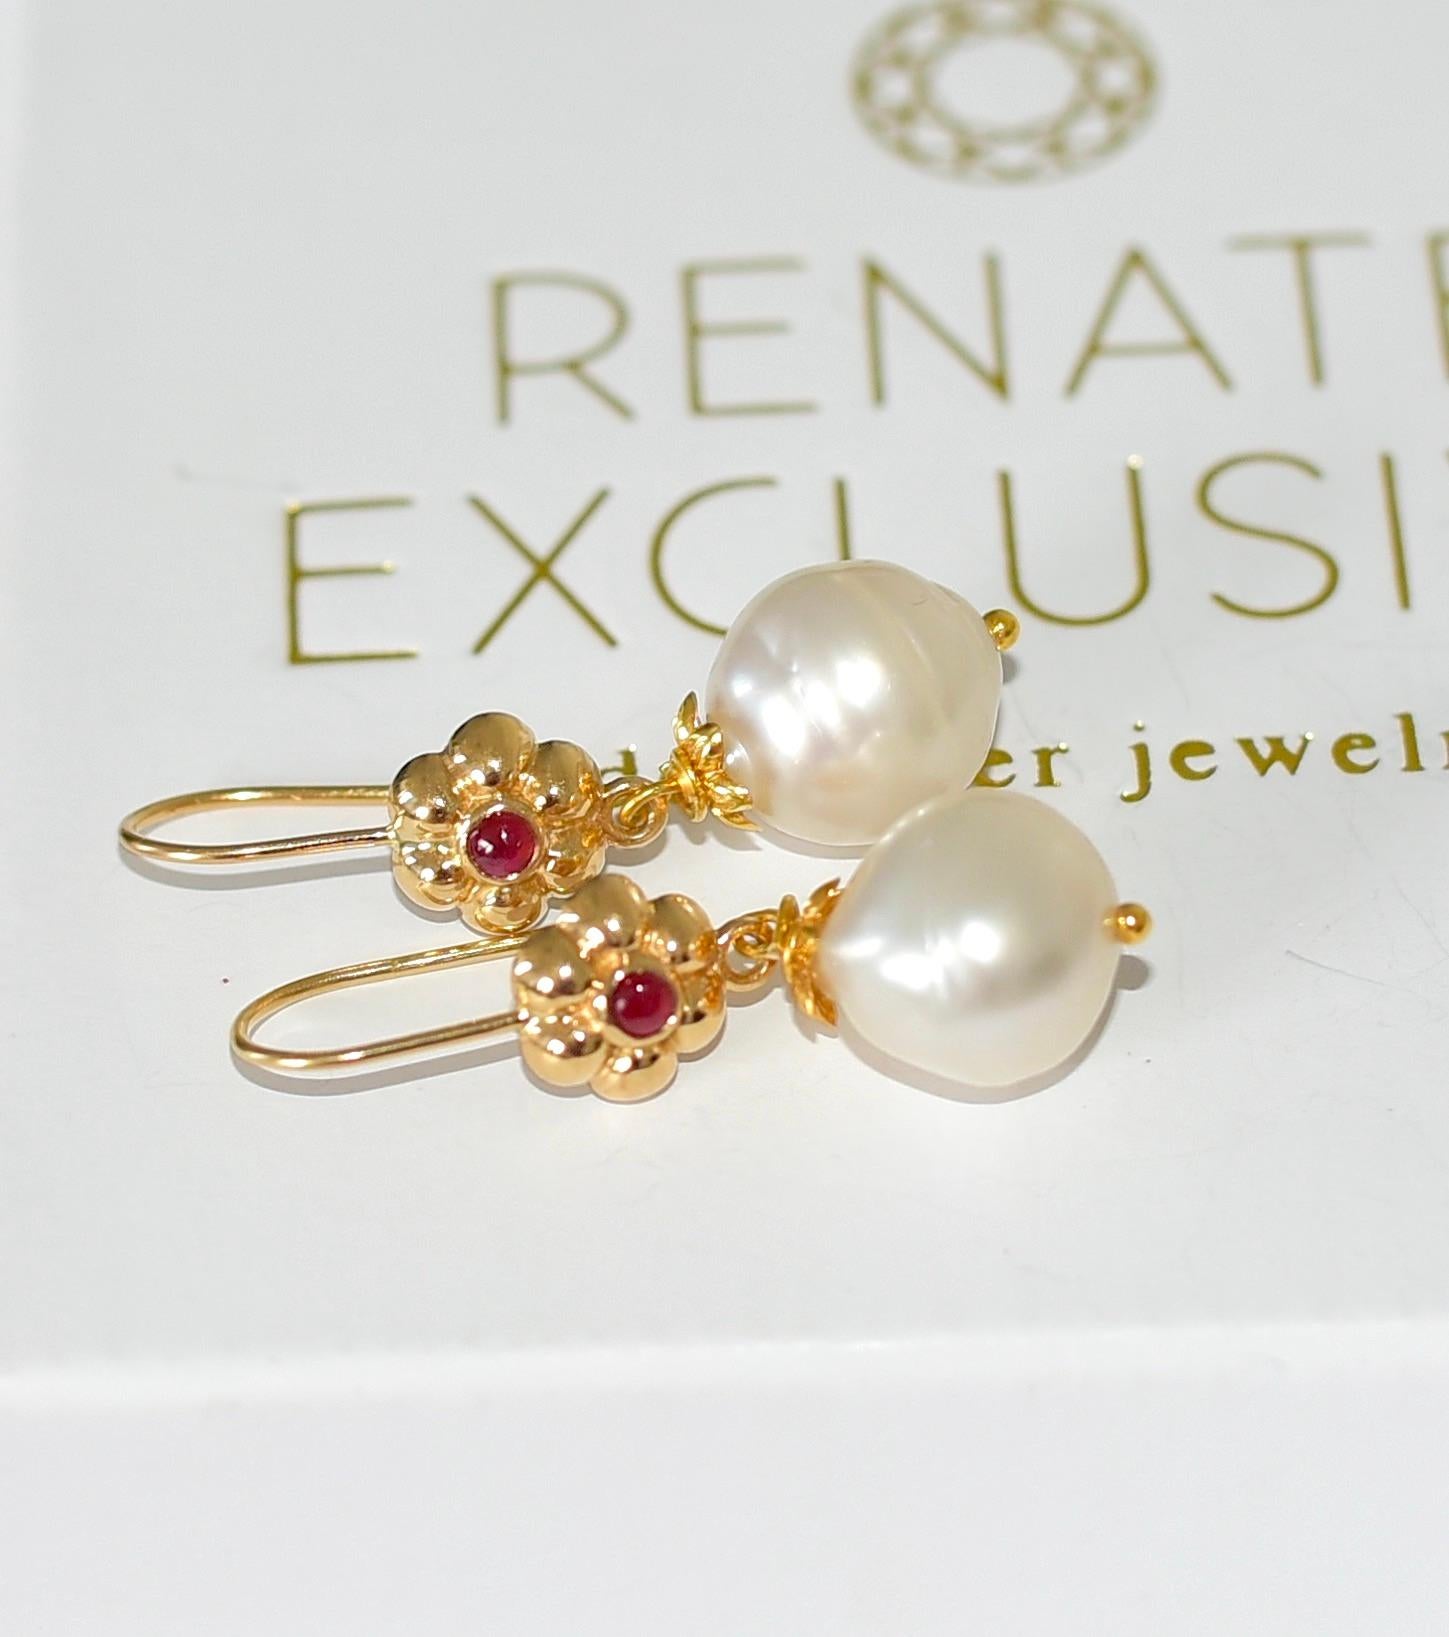 White South Sea Cultured Baroque Pearl ( 11mm ) with elegant
18k Solid Yellow Gold Flower Earwires With Natural RUBY.
Delicate, lovely, elegant. 

Length: ca 1.5 inches
Pearl size: 11mm
18k Solid Yellow Gold, Natural RUBY

All items in this earring